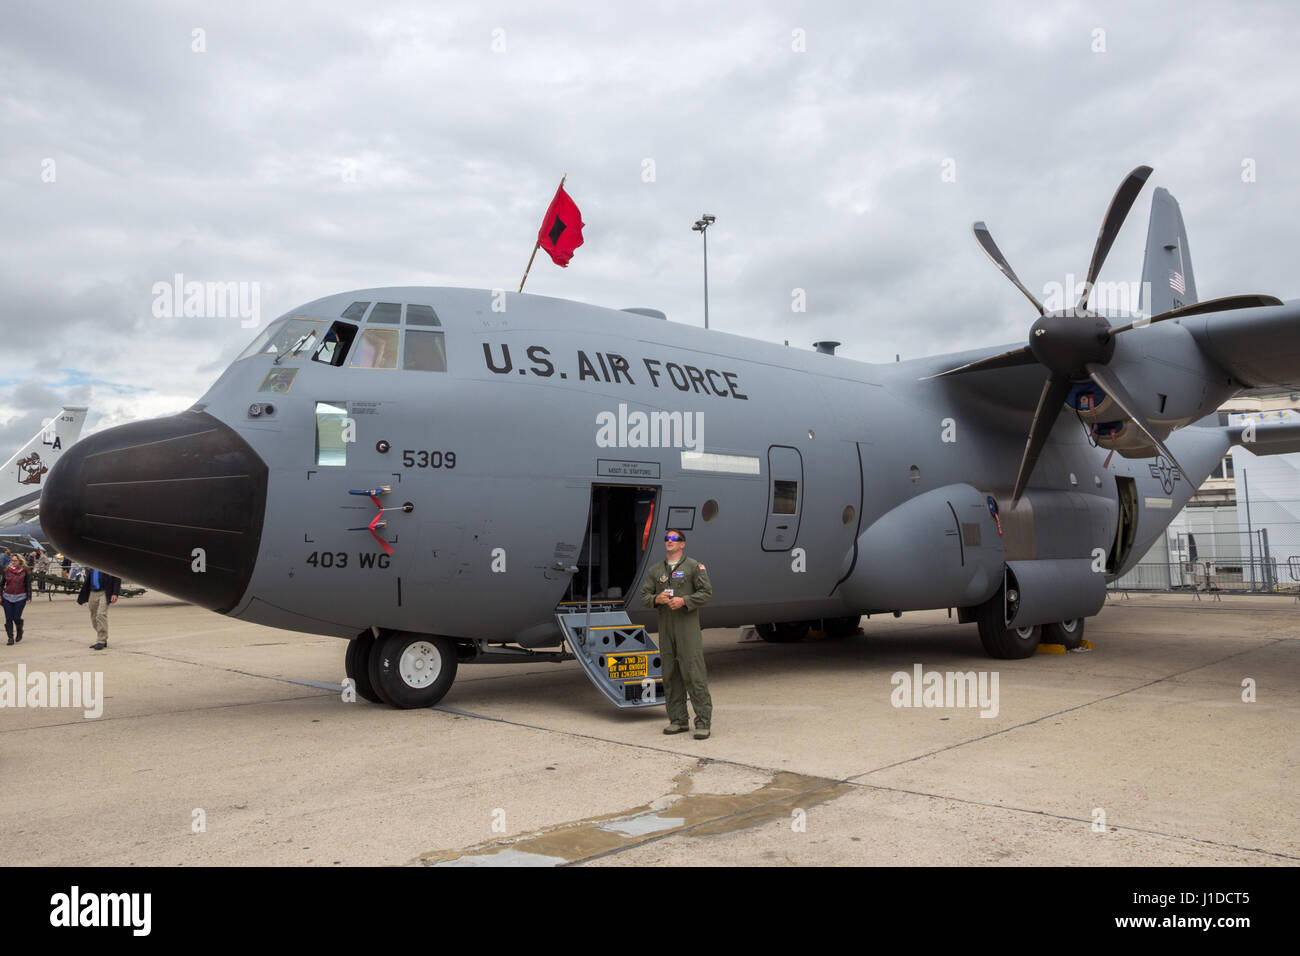 PARIS - LE BOURGET - JUN 18, 2015: Lockheed WC-130J Weatherbird used for weather reconnaissance missions by the US Air Force. Stock Photo